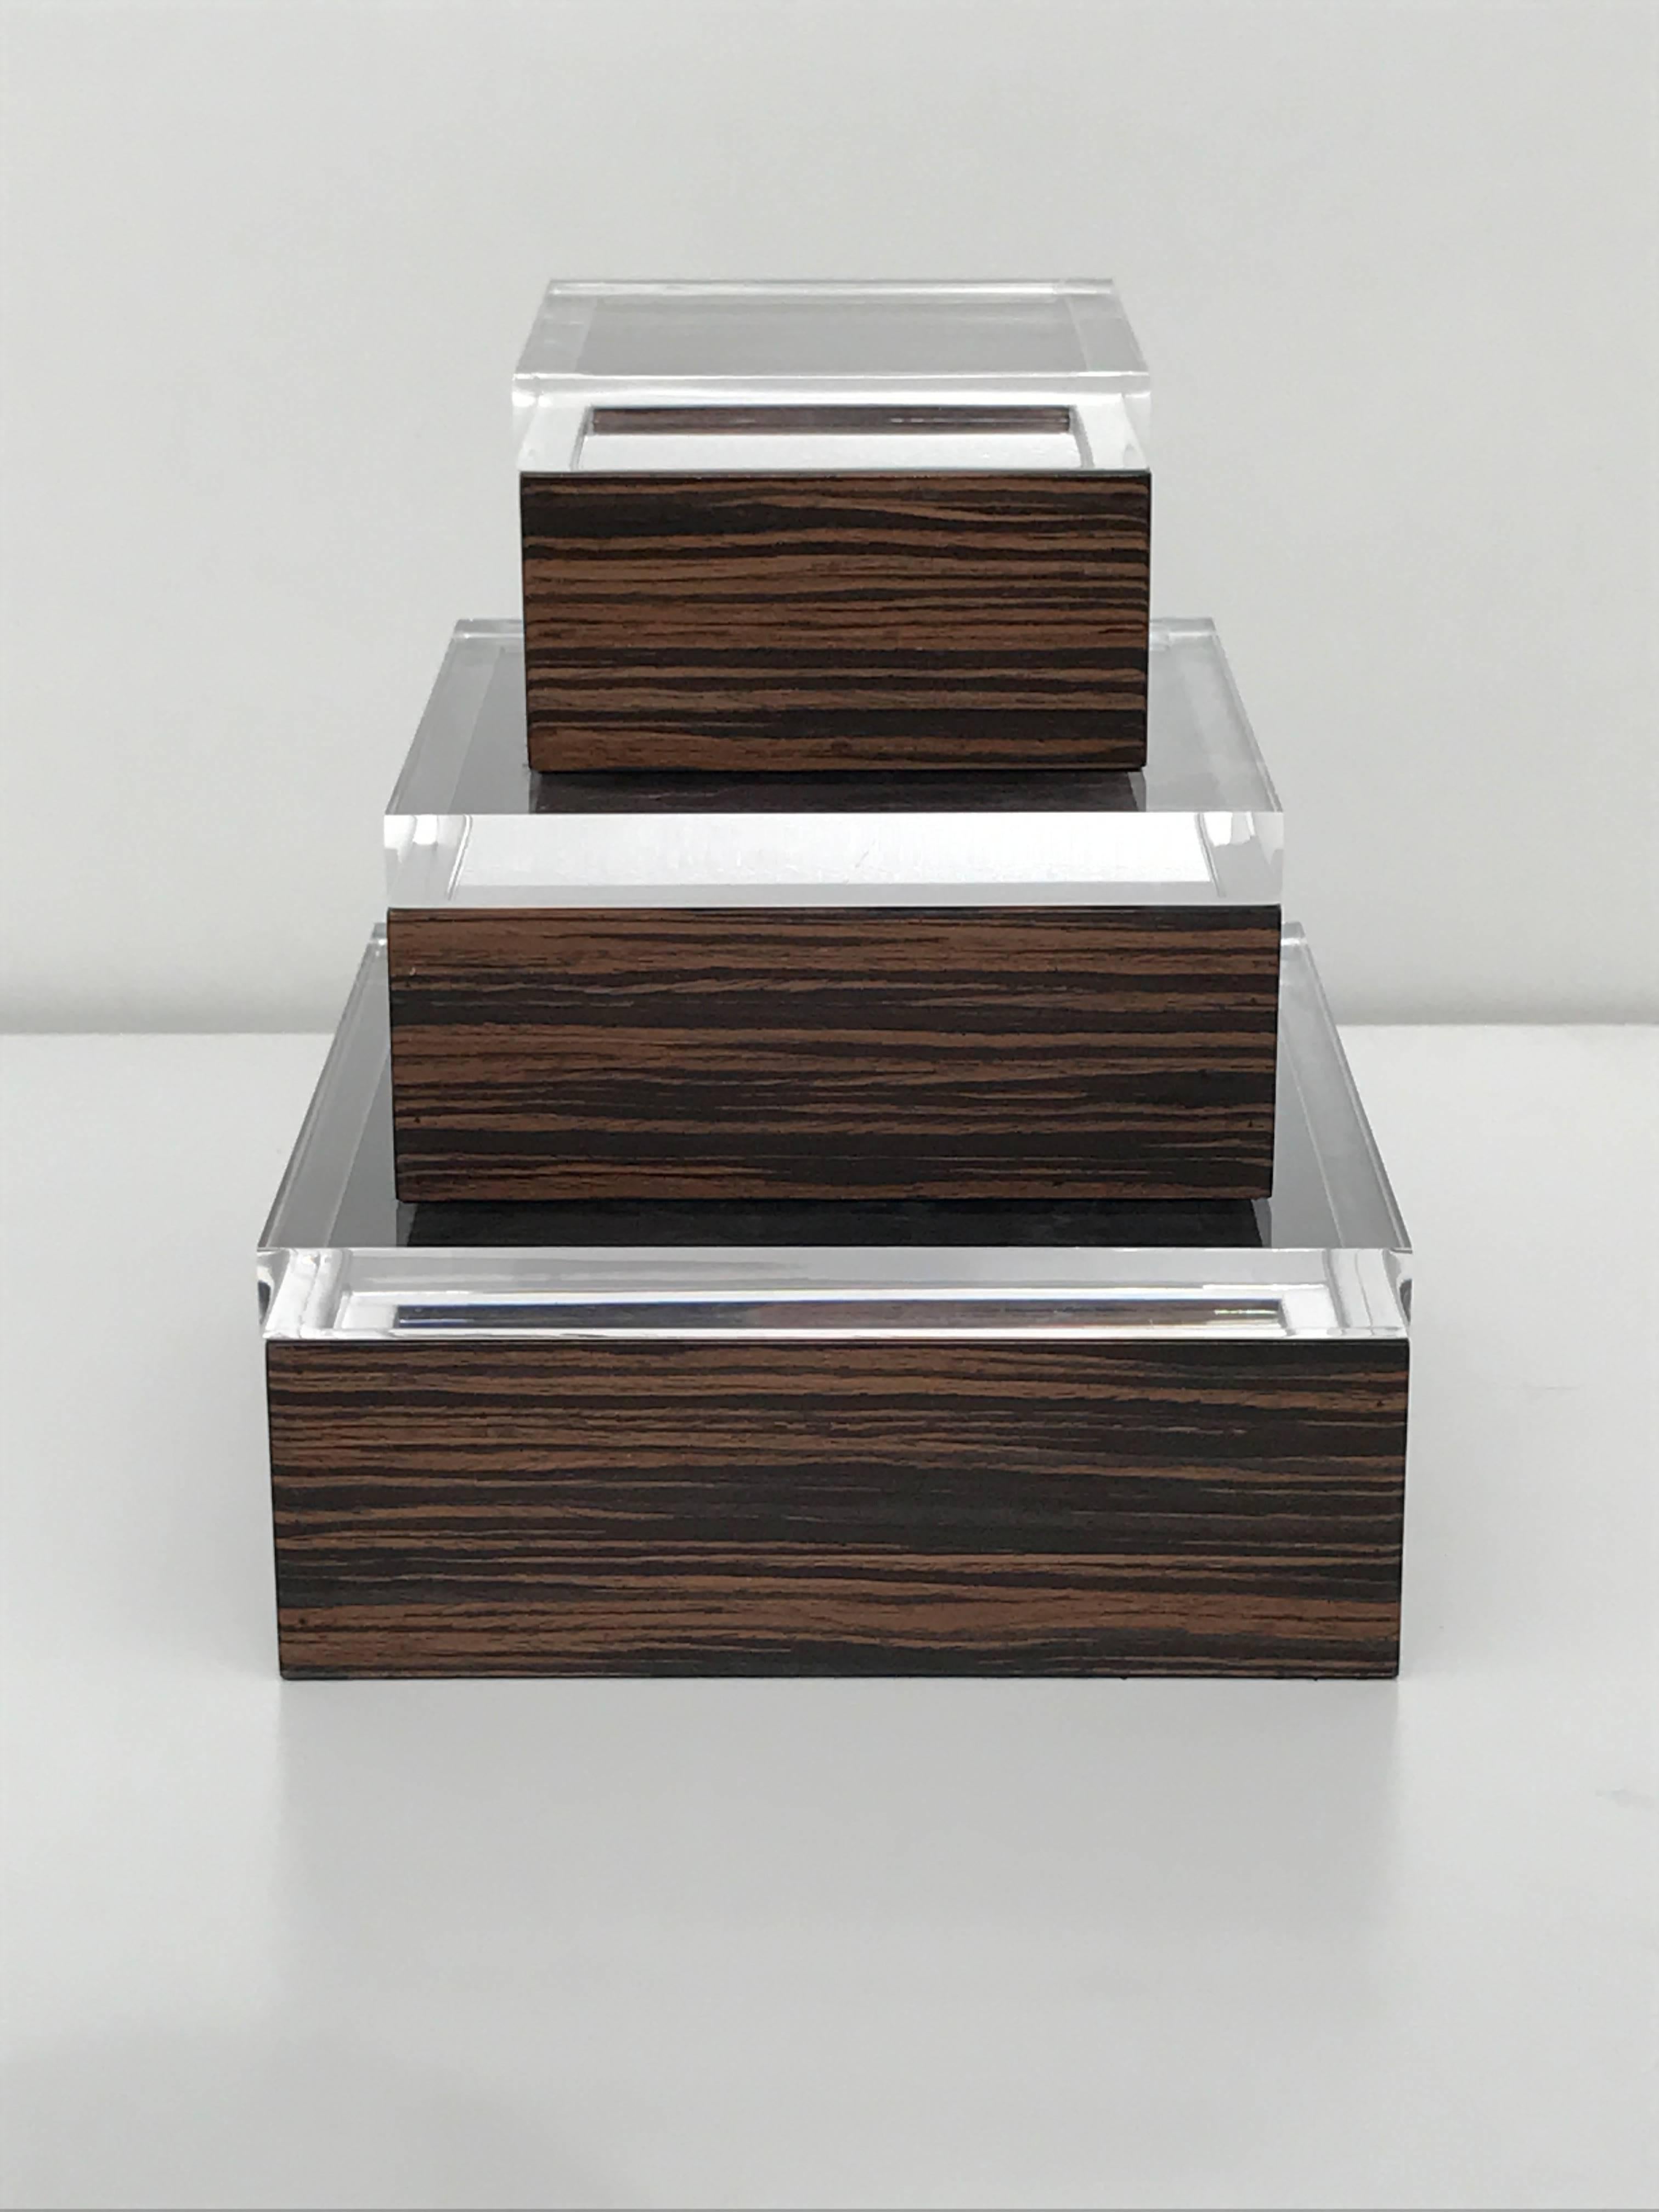 Set of three Macassar Ebony and Lucite jewelry boxes.
Measures: Large box 9